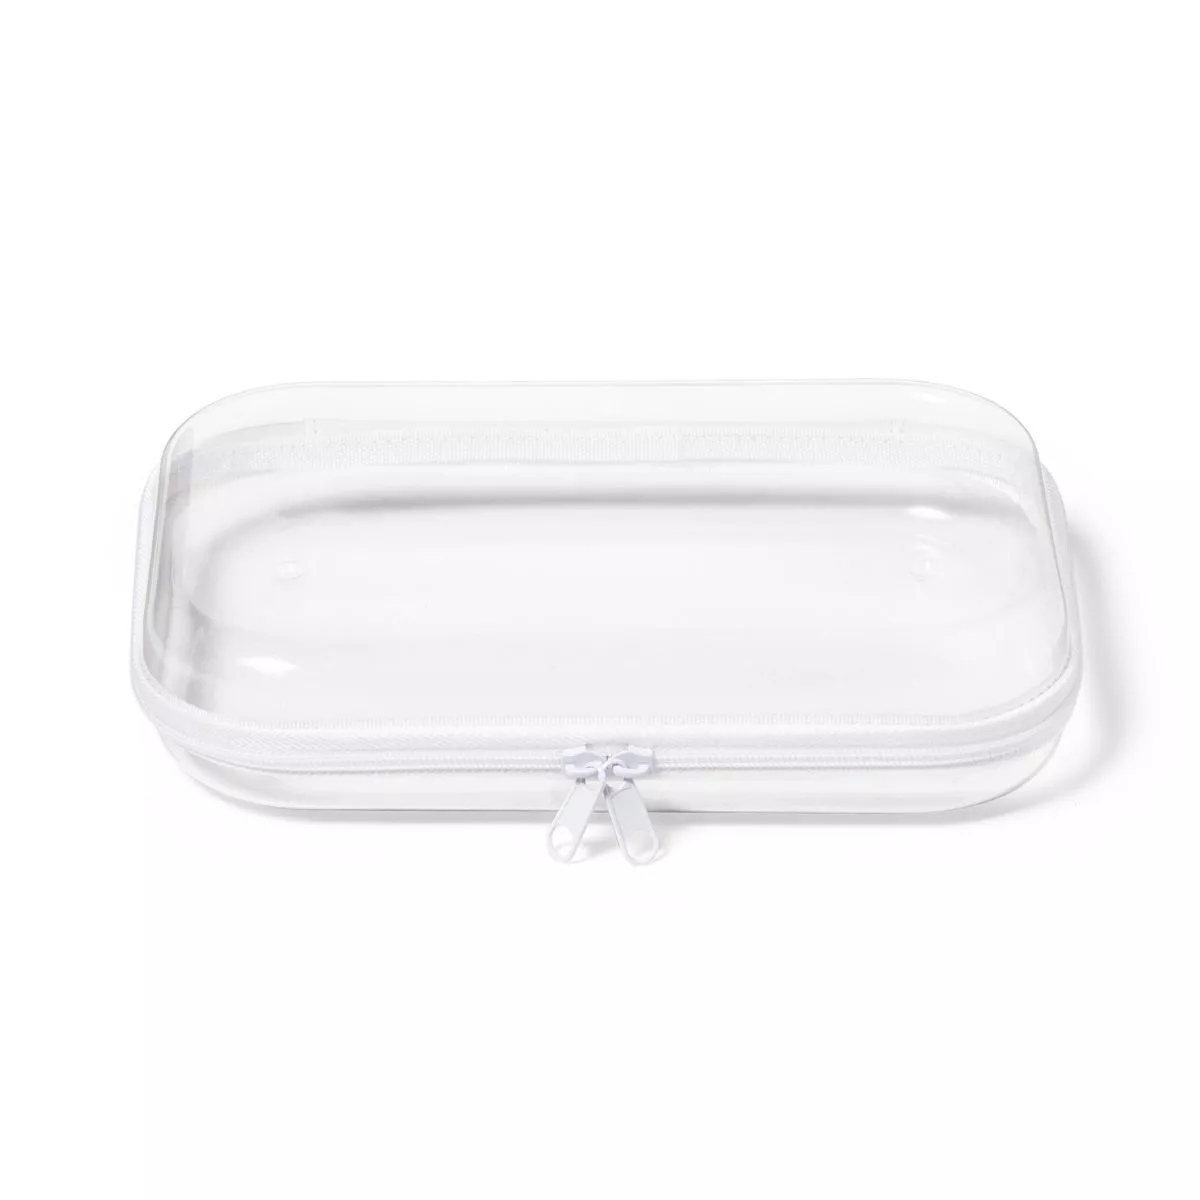 Clear Pencil Case With Zipper, Clear Hard Shell Zipper Case, Snack Bag 